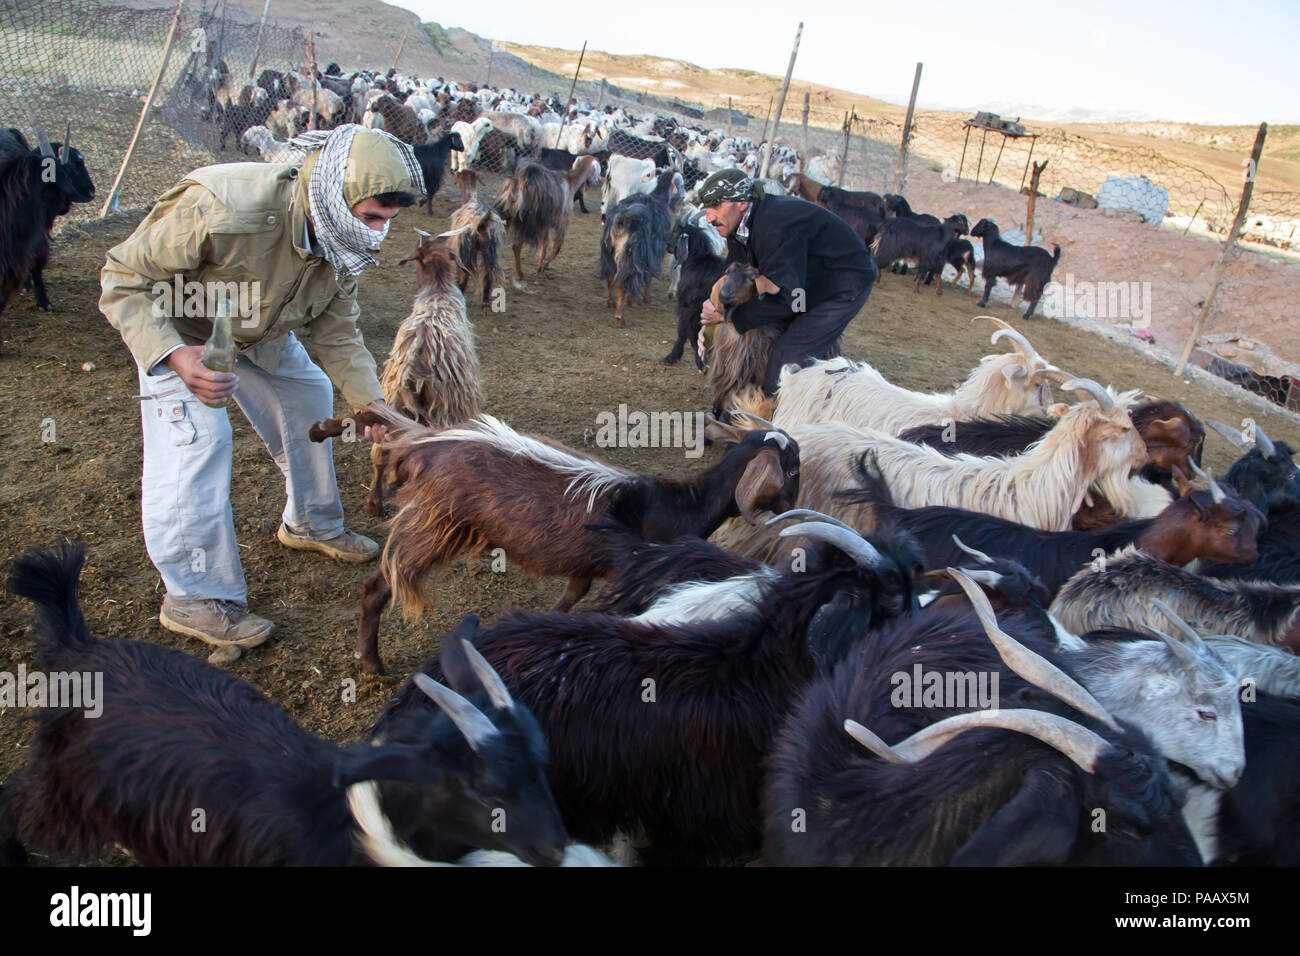 Qashqai shepherds with their goats in the early morning, nomad people, Iran Stock Photo